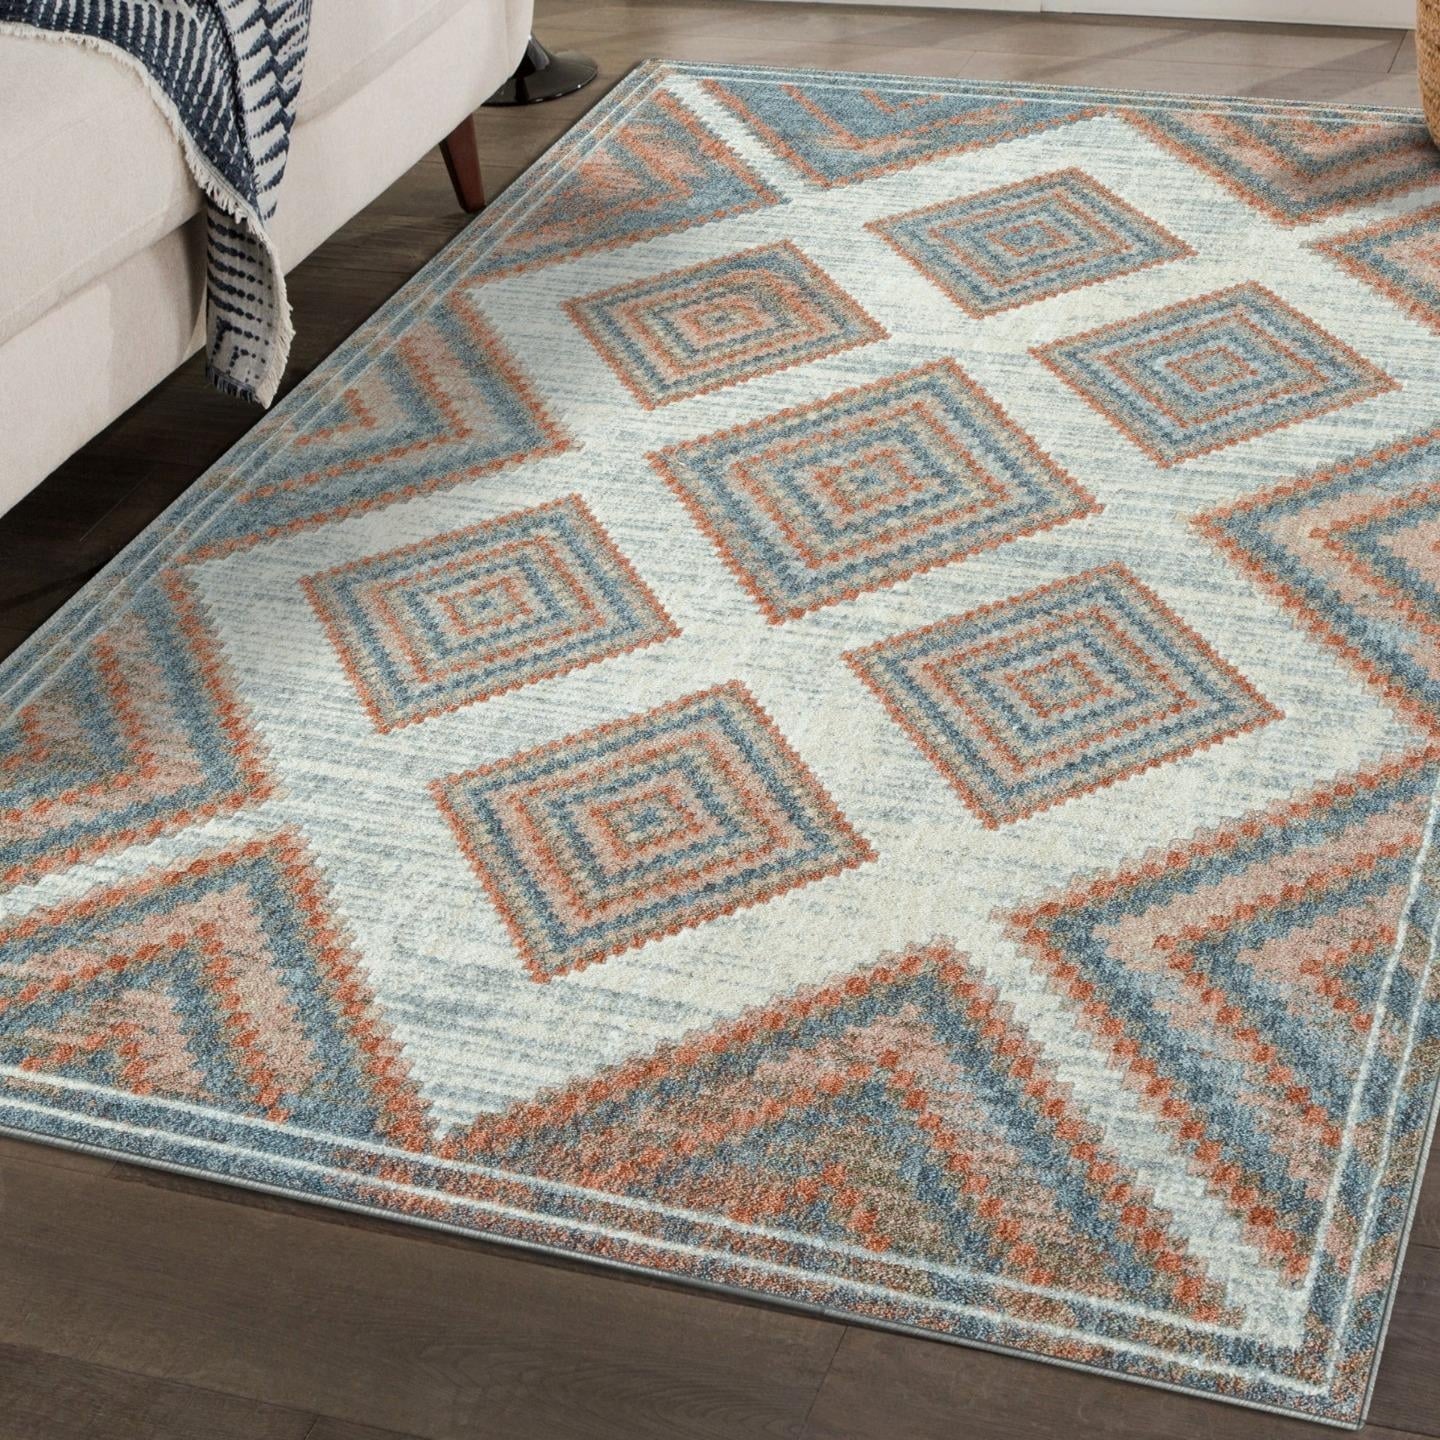 https://ak1.ostkcdn.com/images/products/is/images/direct/c0dda5fcd2e5c14431c307e206f7a3be7cf49cec/Luxe-Weavers-Multicolor-Modern-Geometric-Area-Rug-for-Living-Room.jpg